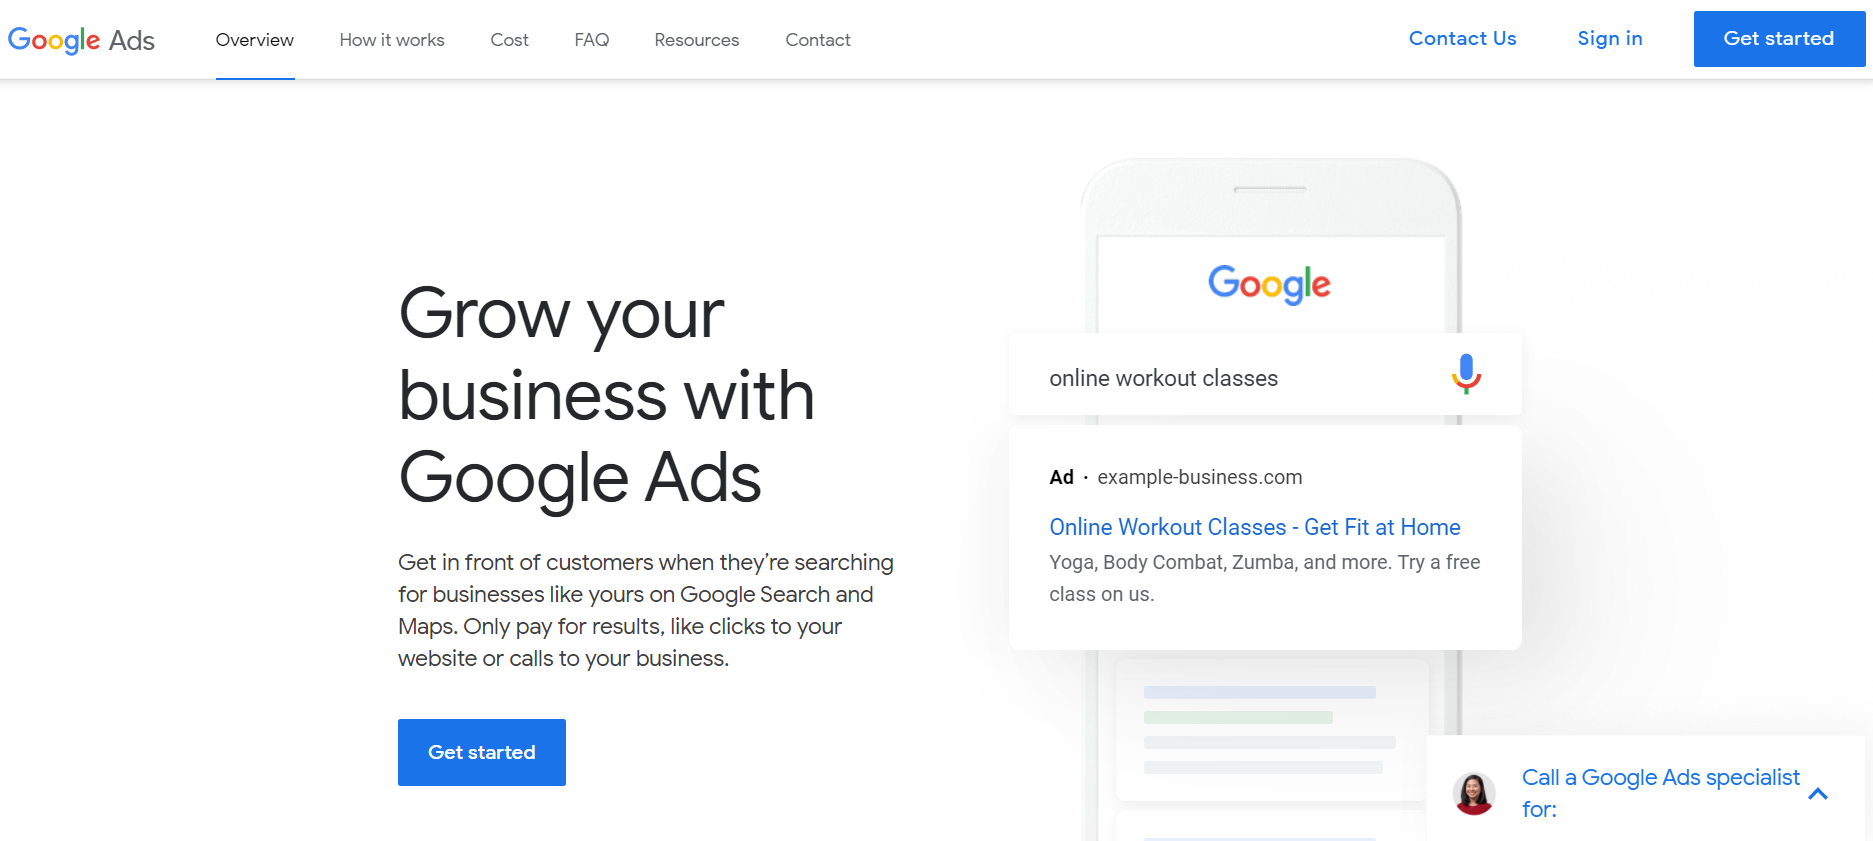 Advertise on Google Ads Get Started